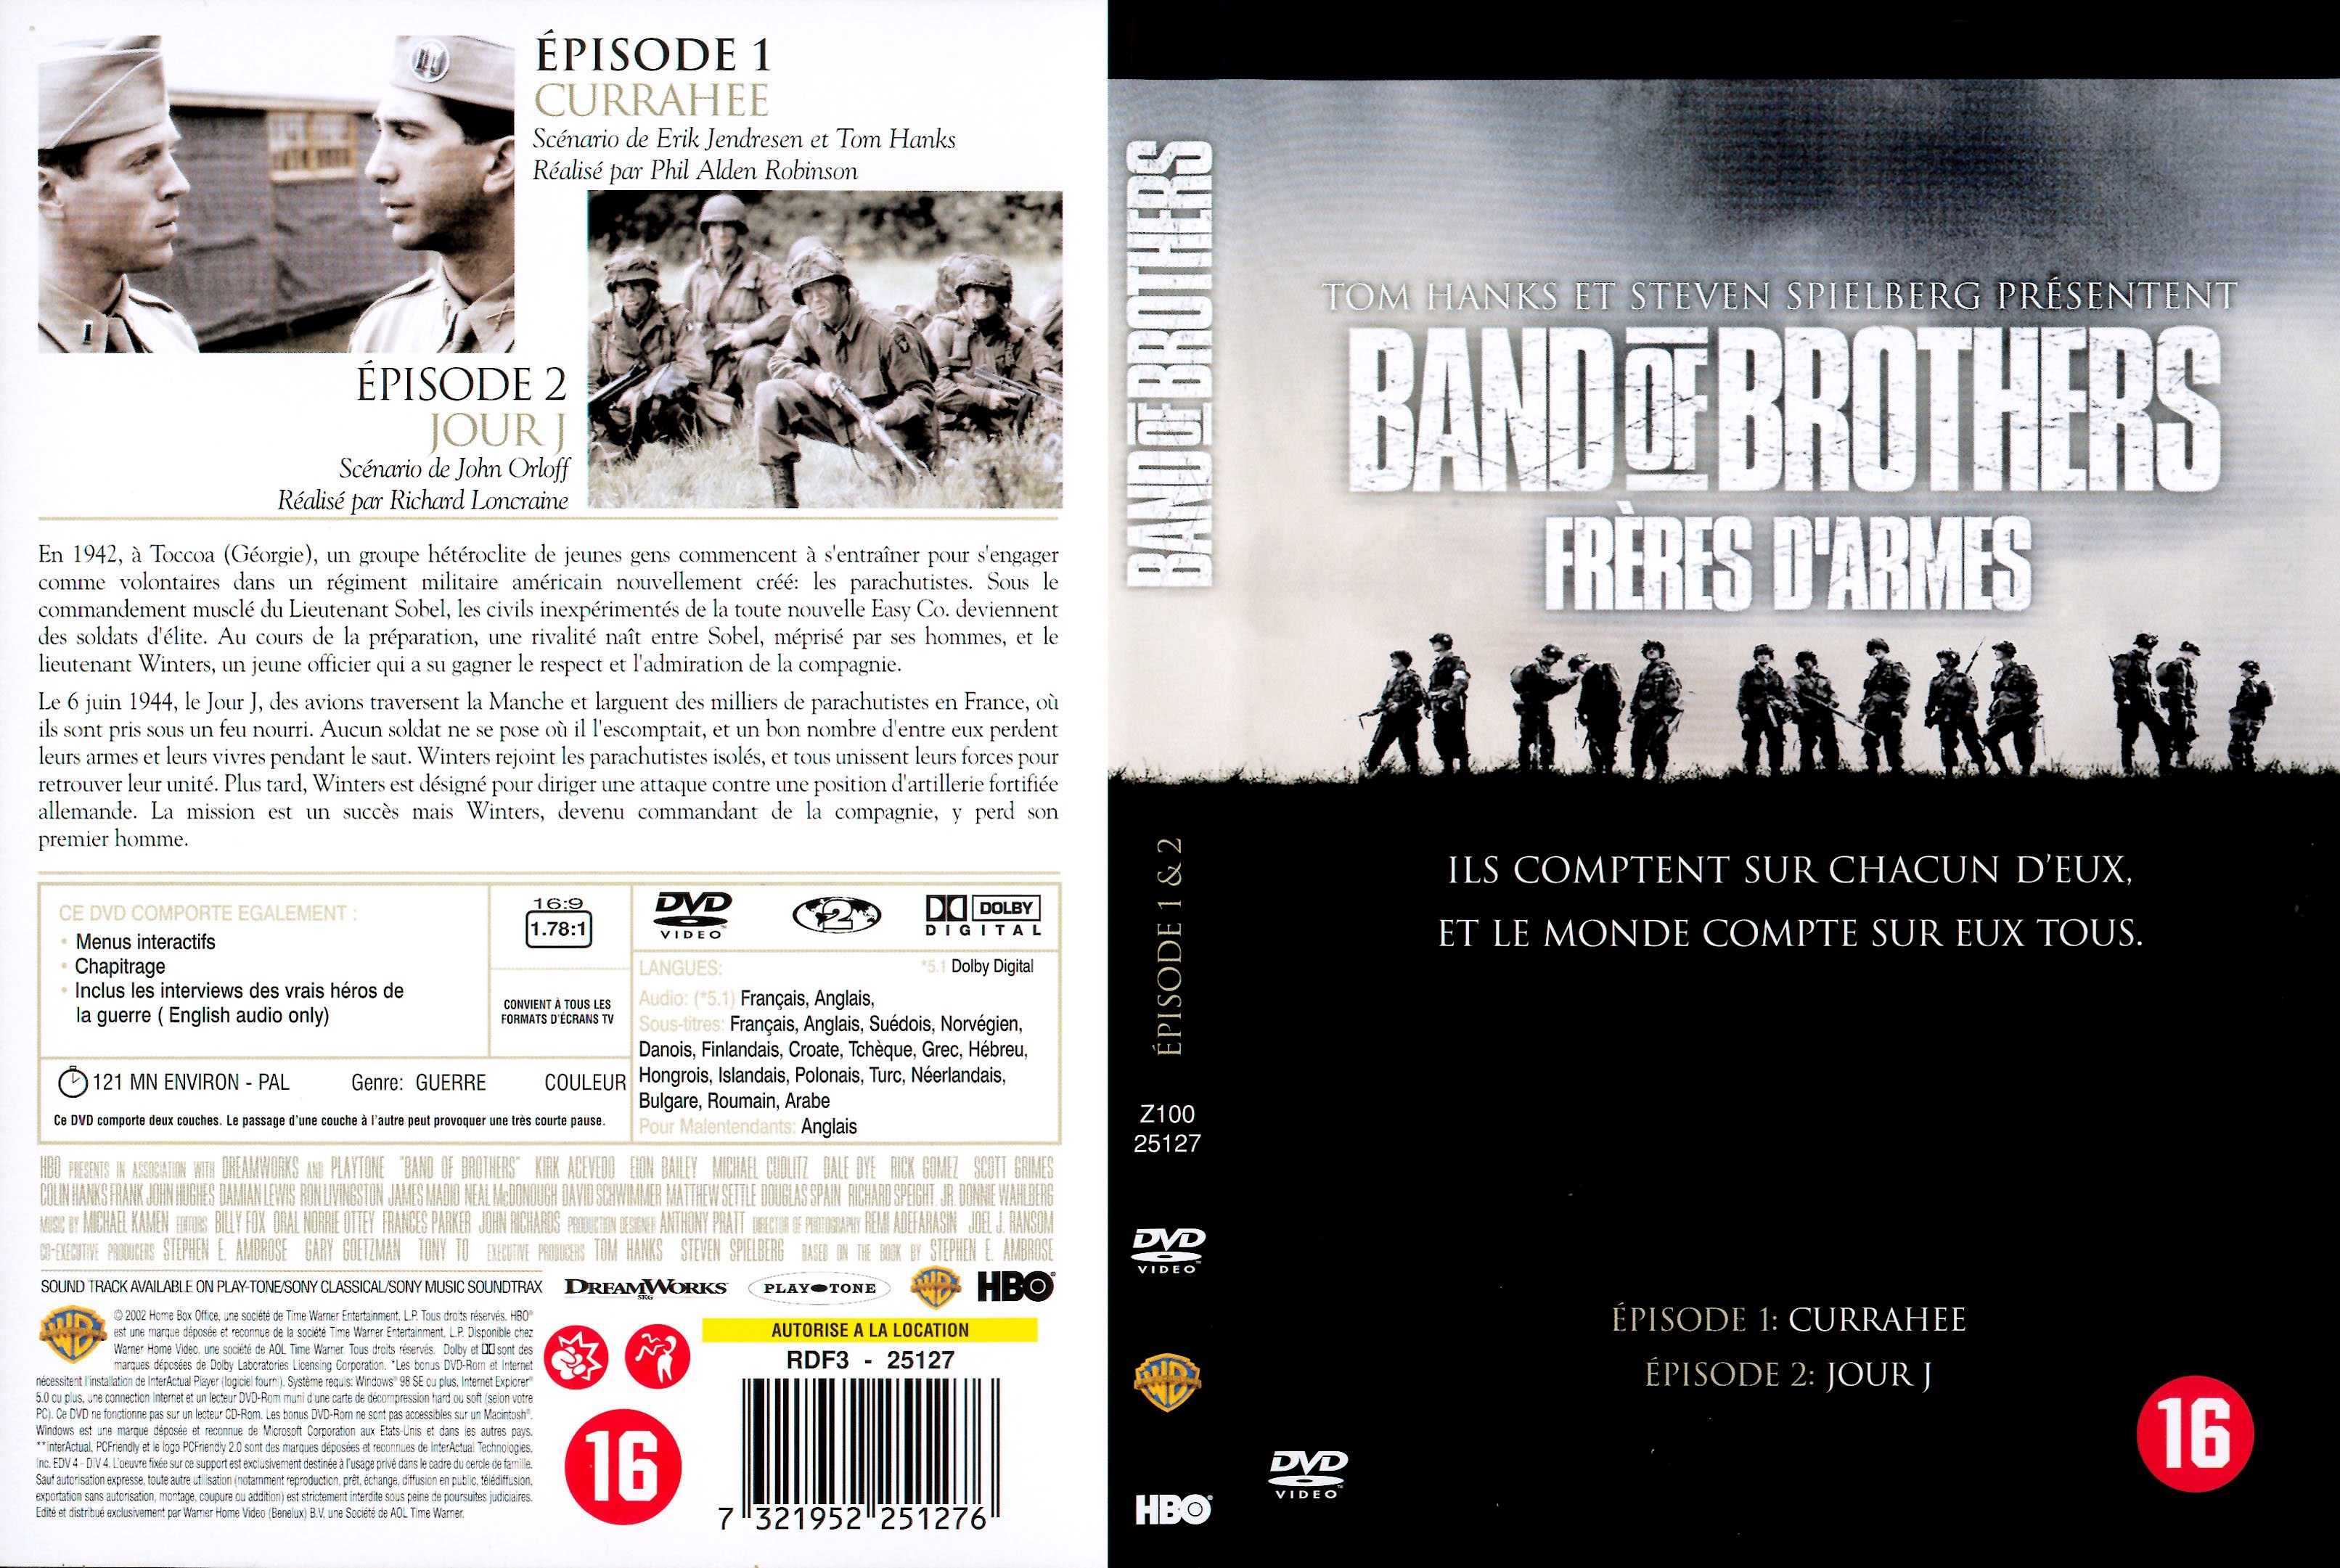 Jaquette DVD Band of brothers vol 1